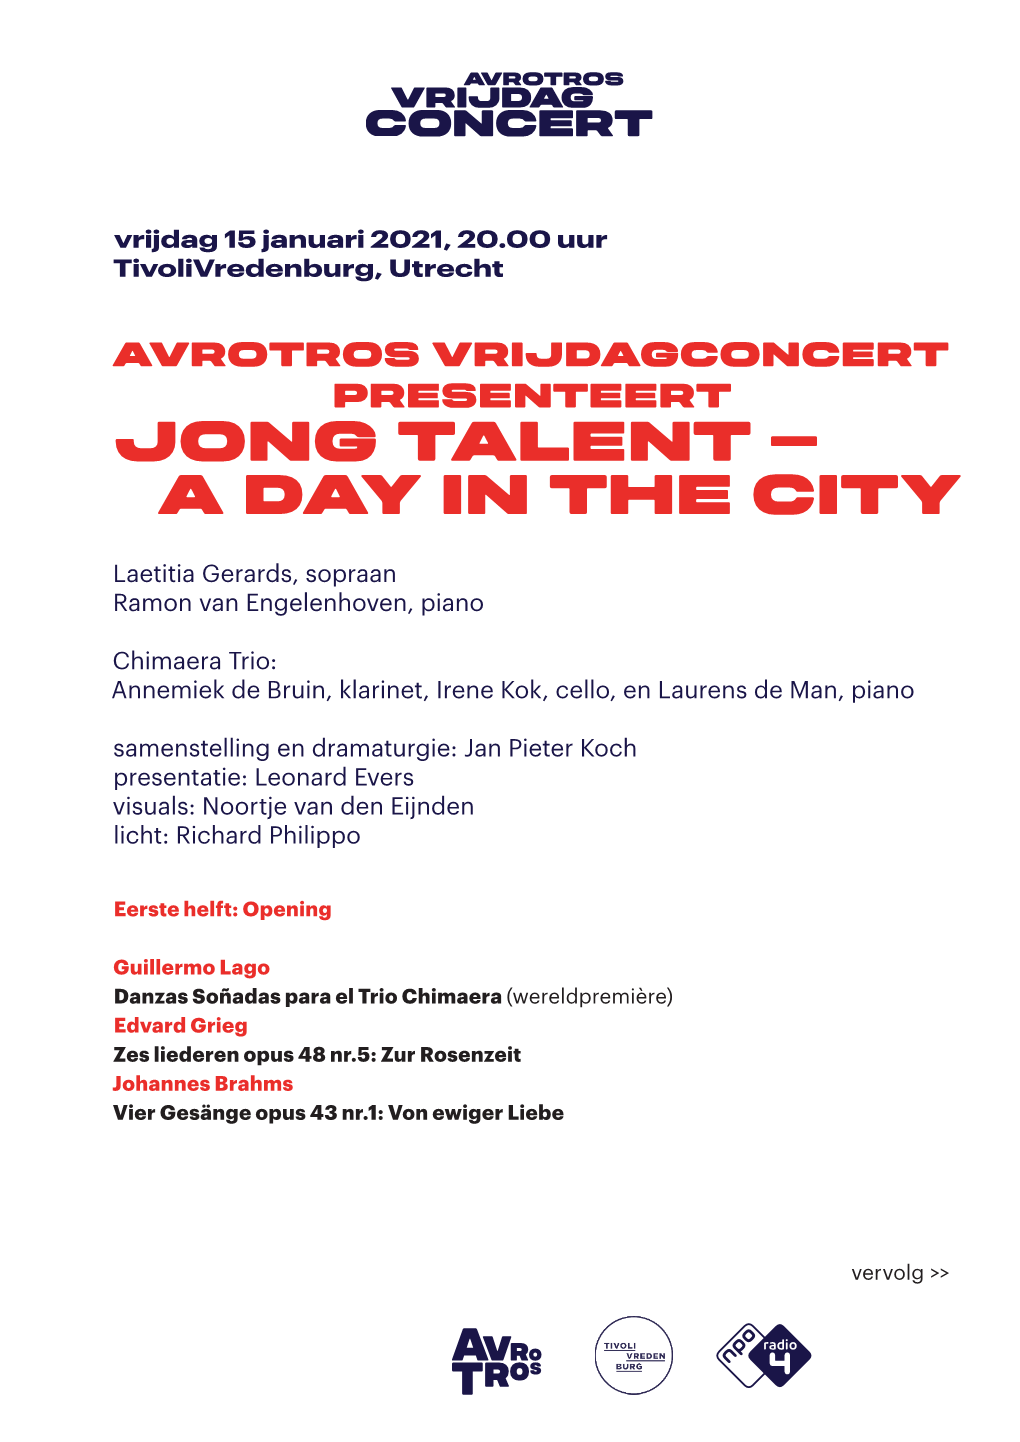 Jong Talent – a Day in the City